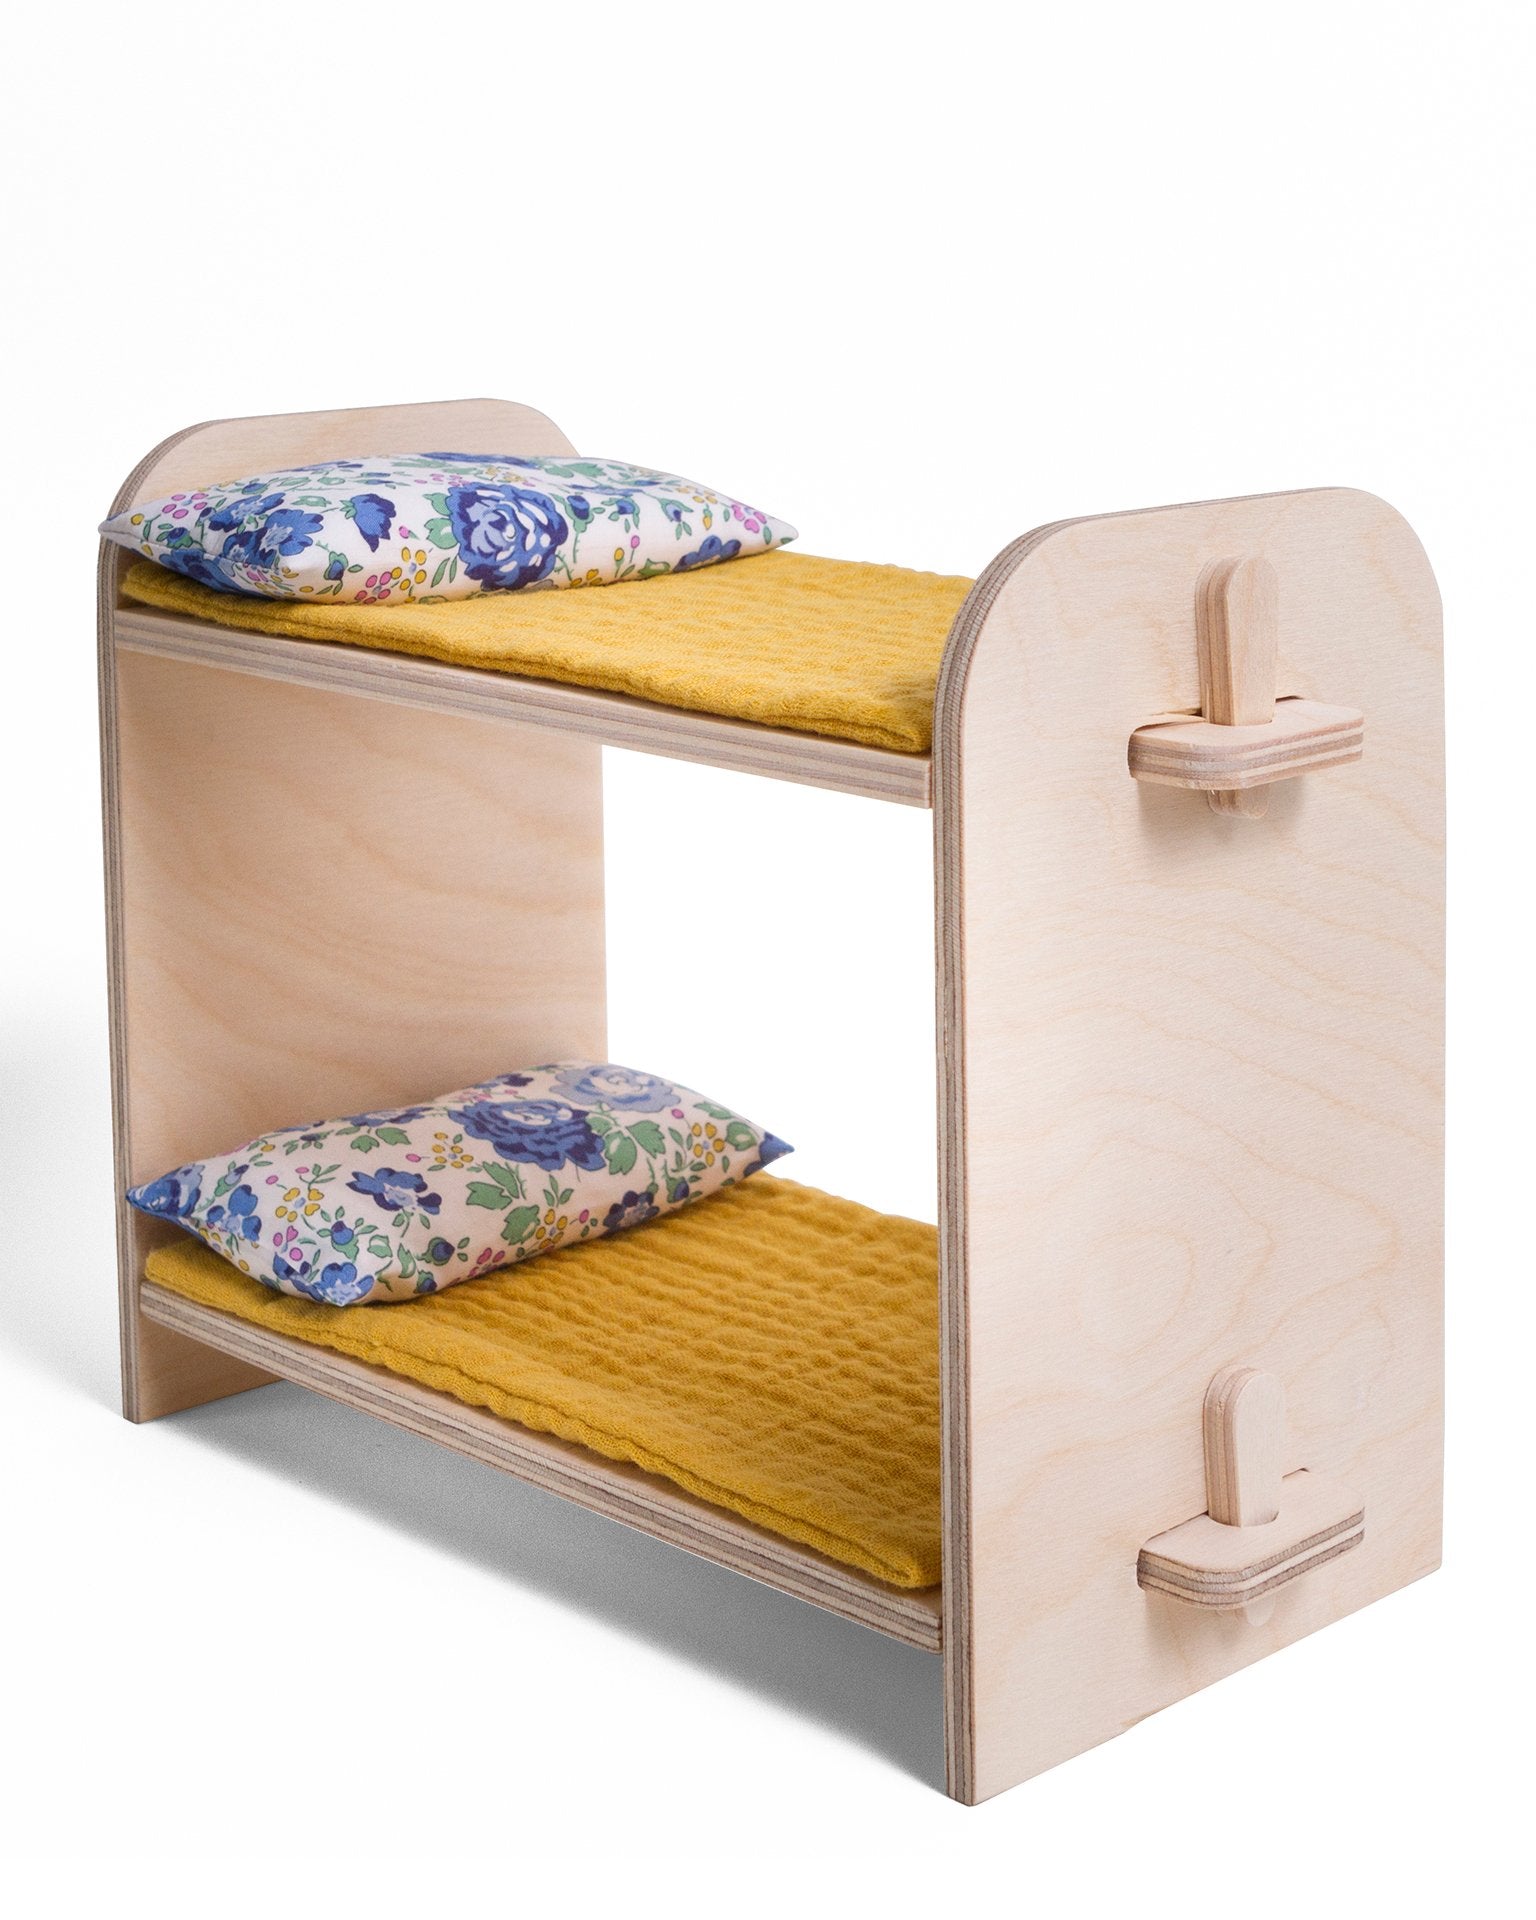 Little maquette kids play bunk bed in marigold